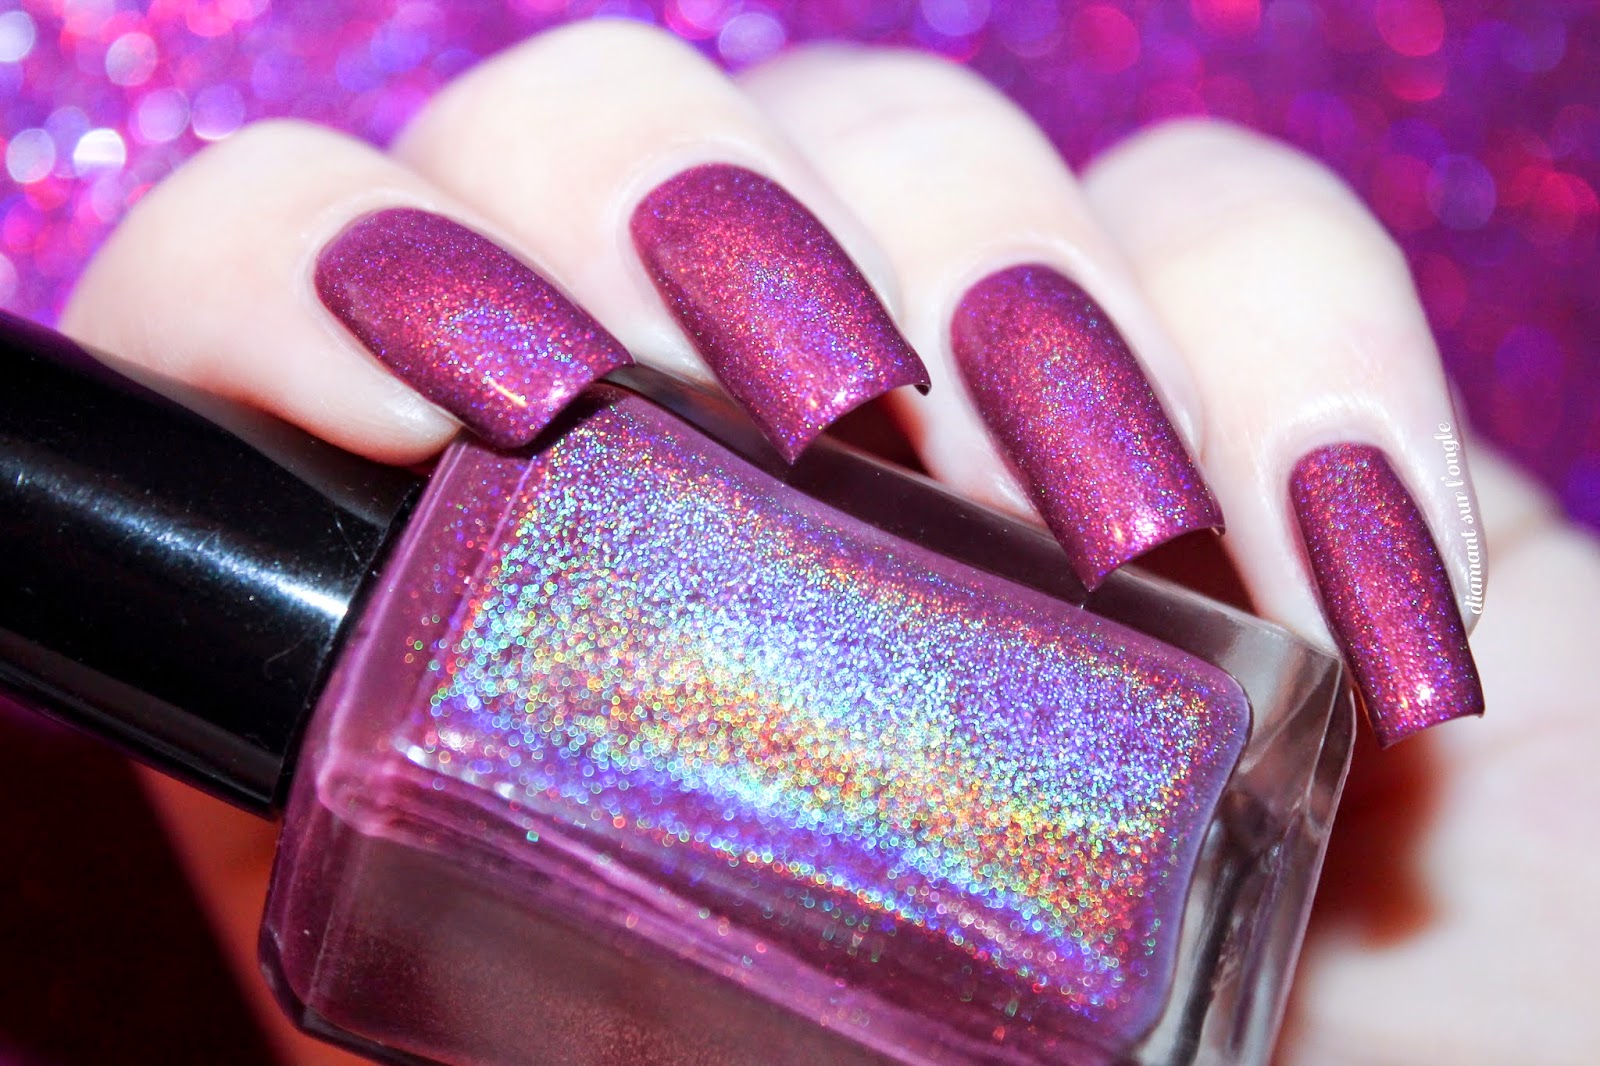 Swatch of February 2014 by Enchanted Polish